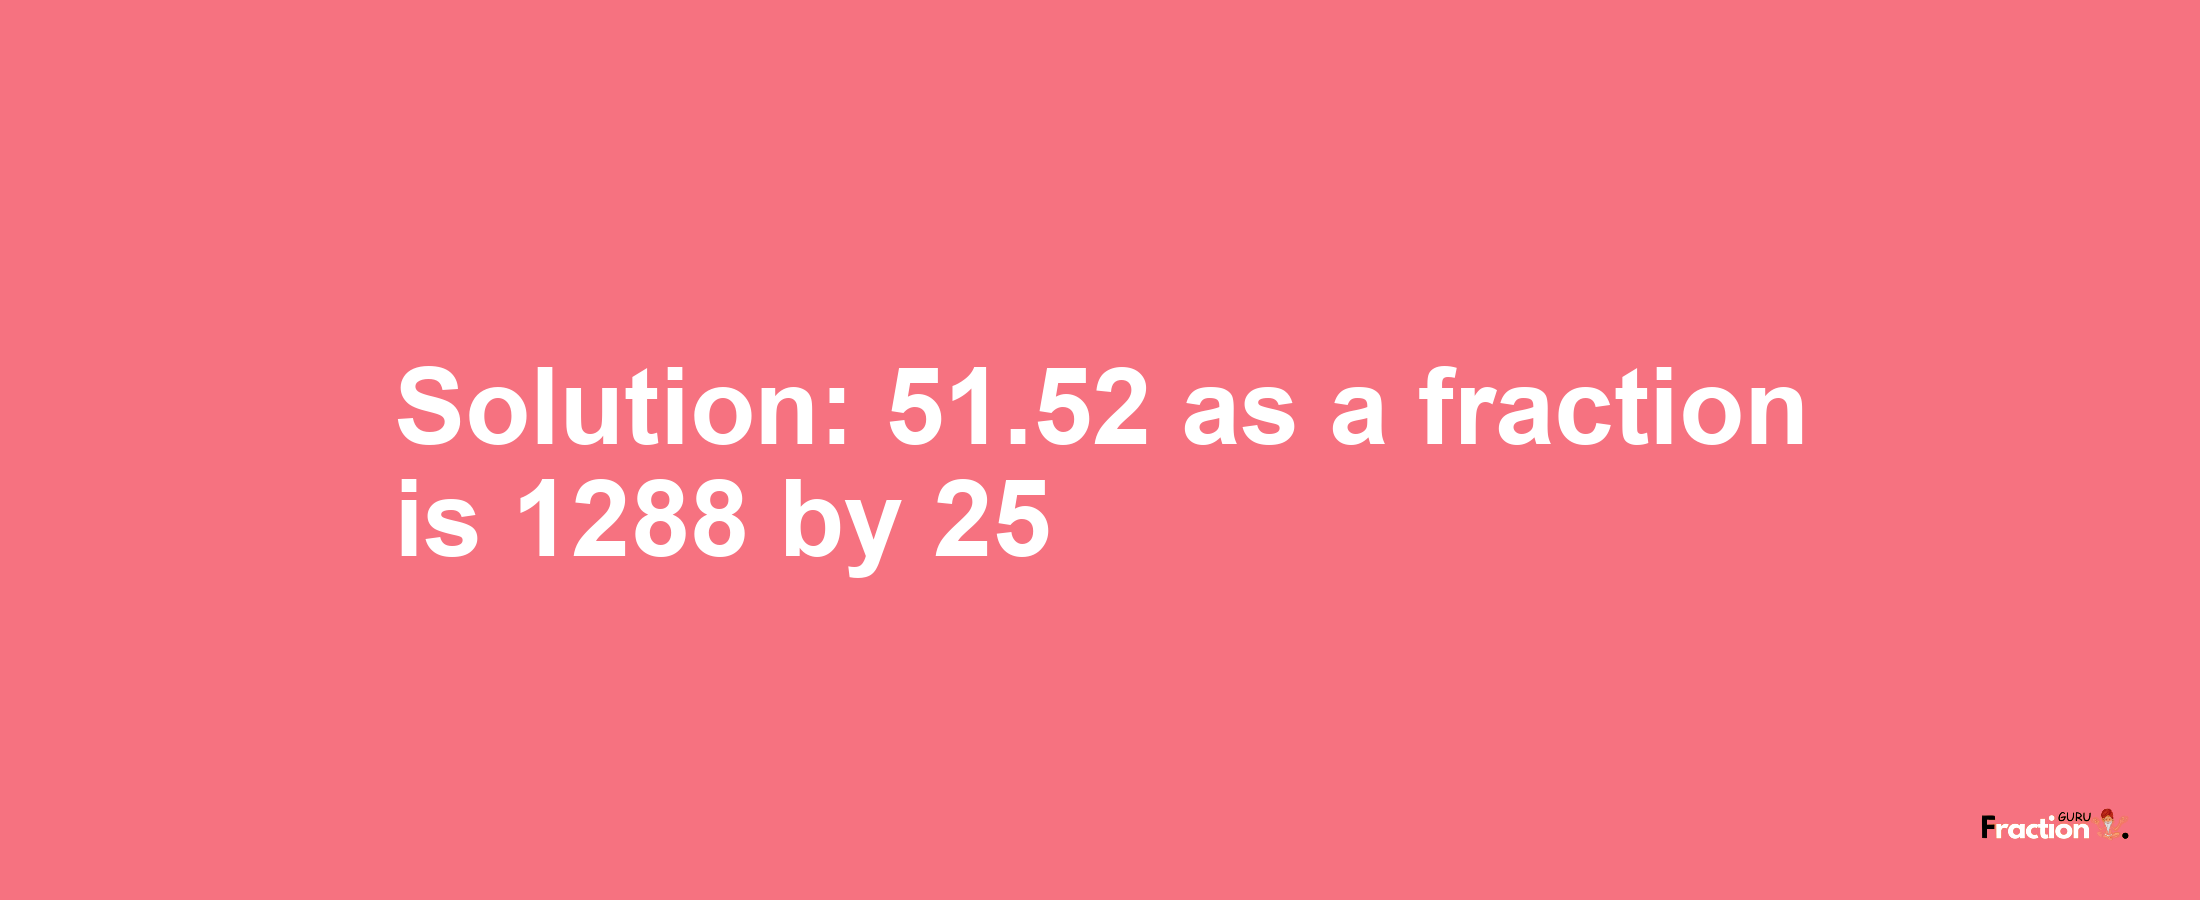 Solution:51.52 as a fraction is 1288/25